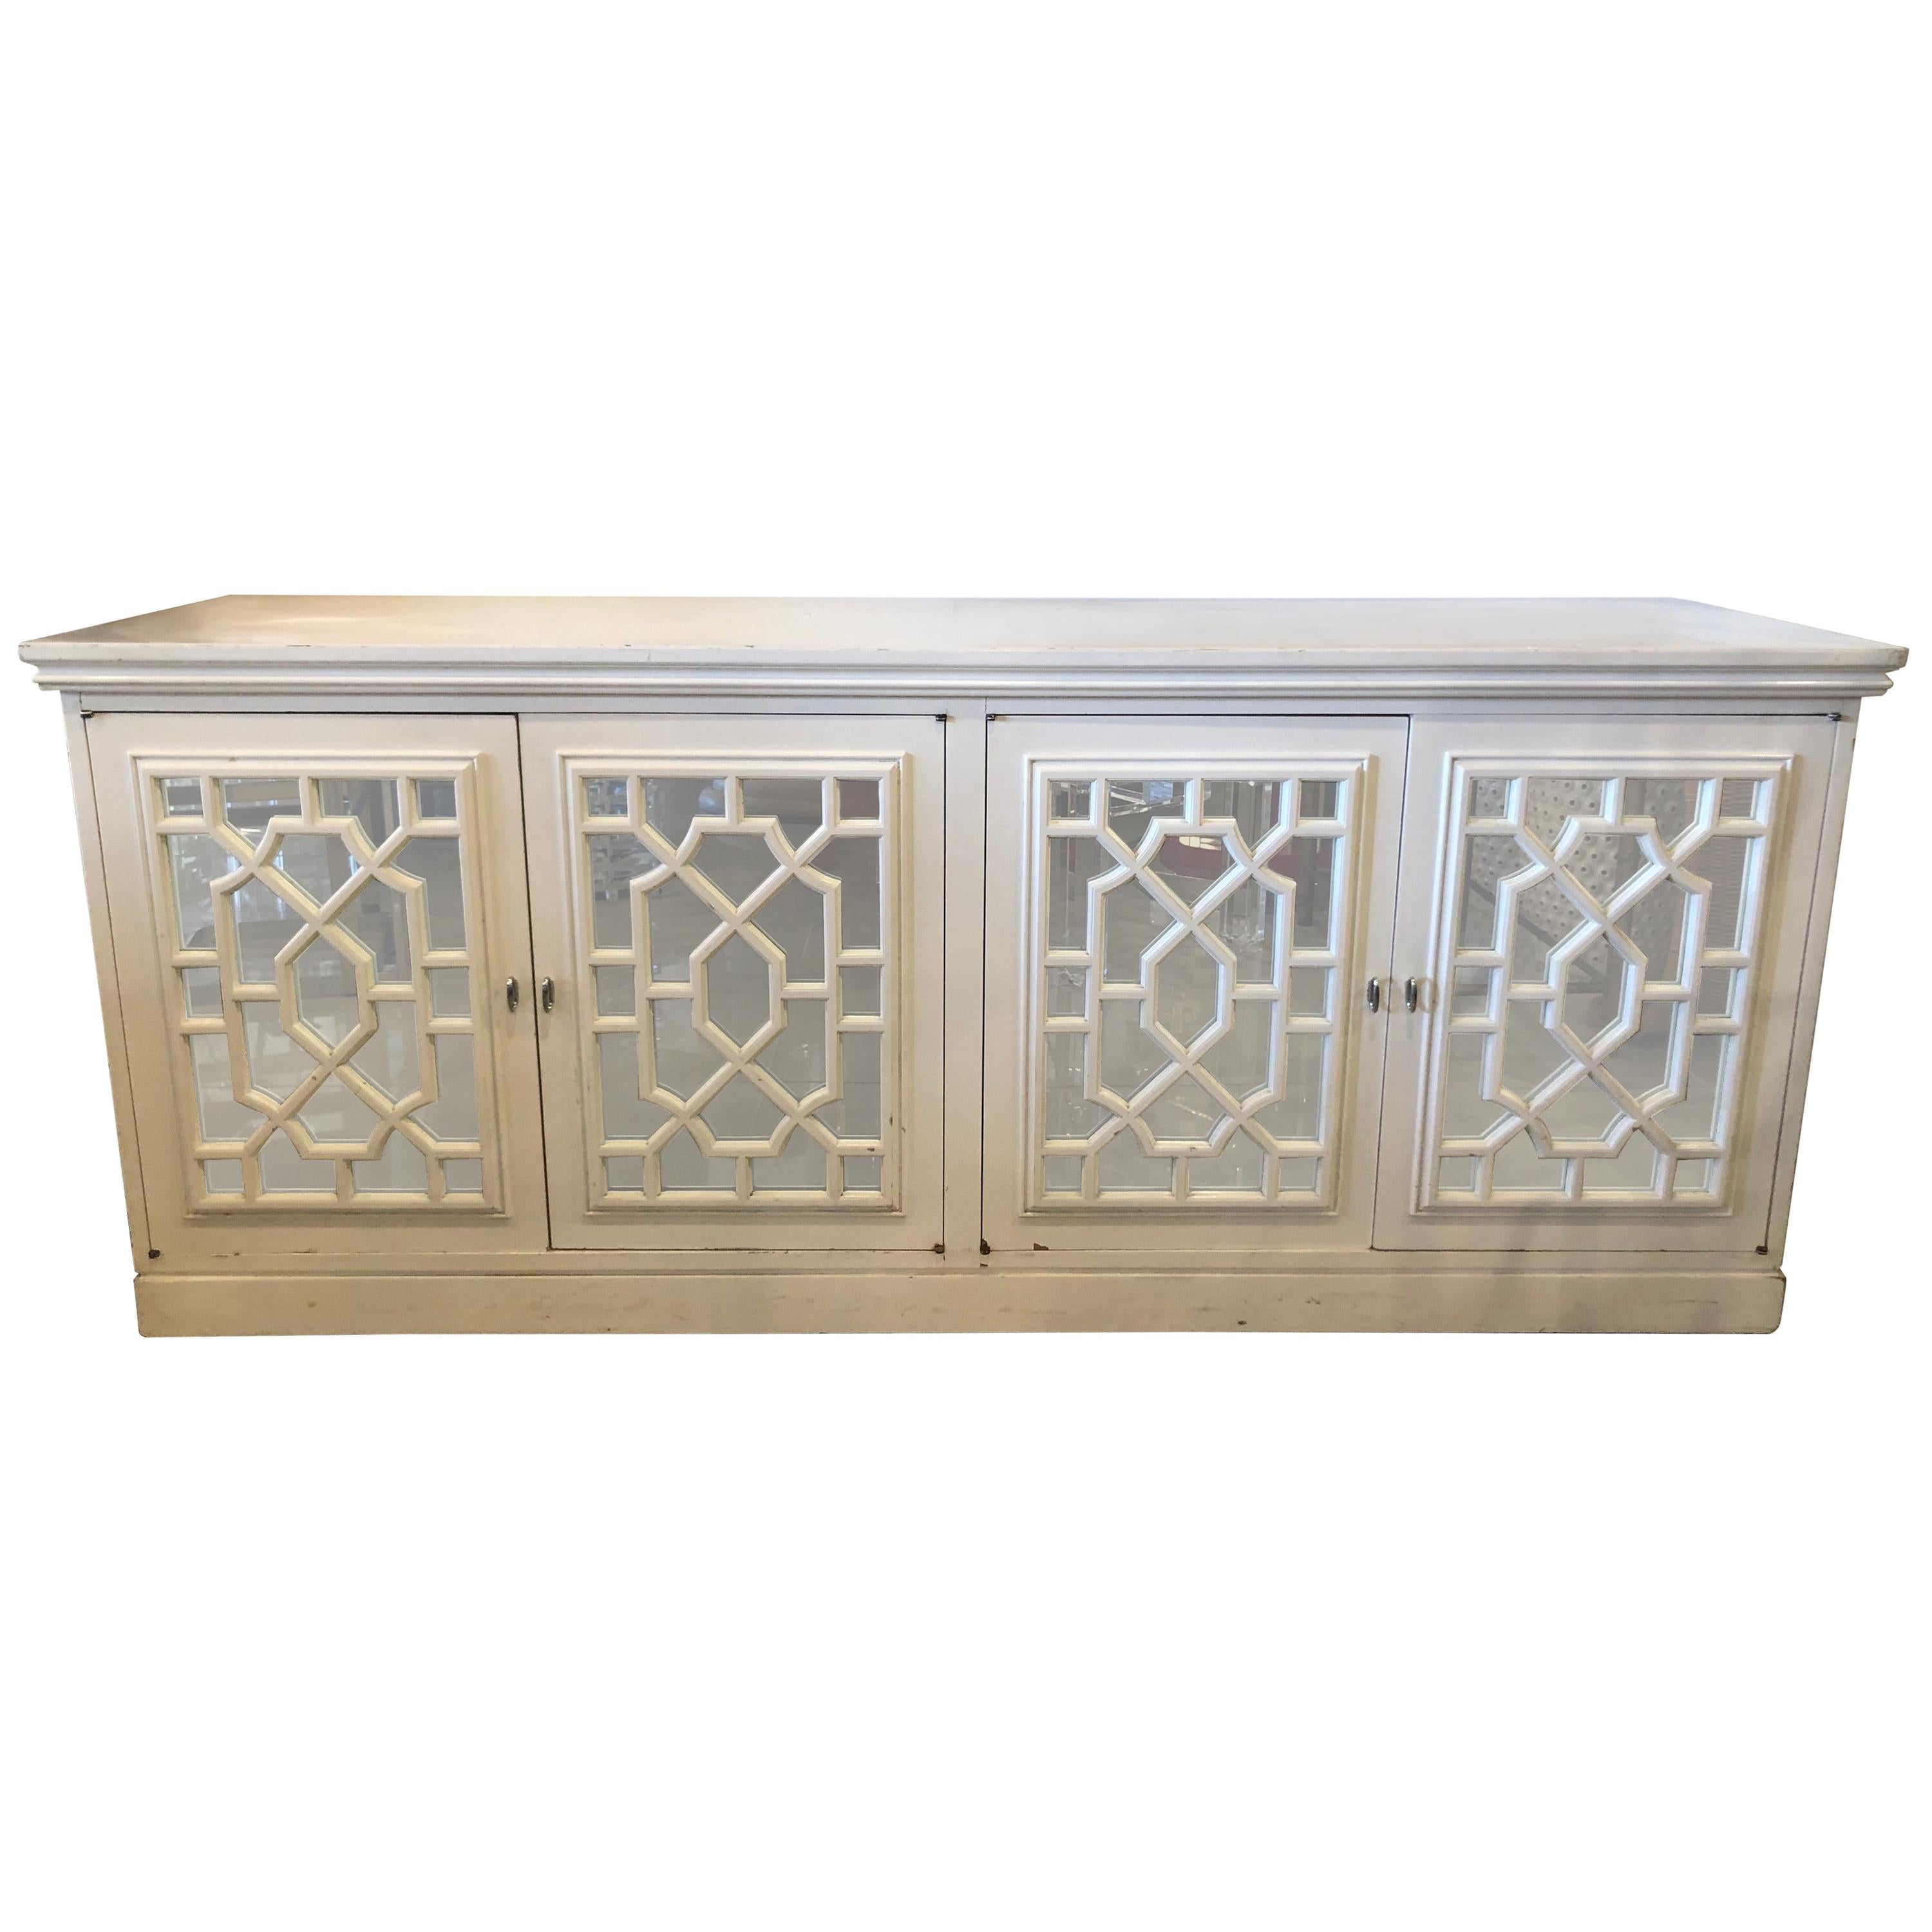 Vintage Fretwork Fret Chinese Chippendale Mirrored Cabinet Credenza Sideboard